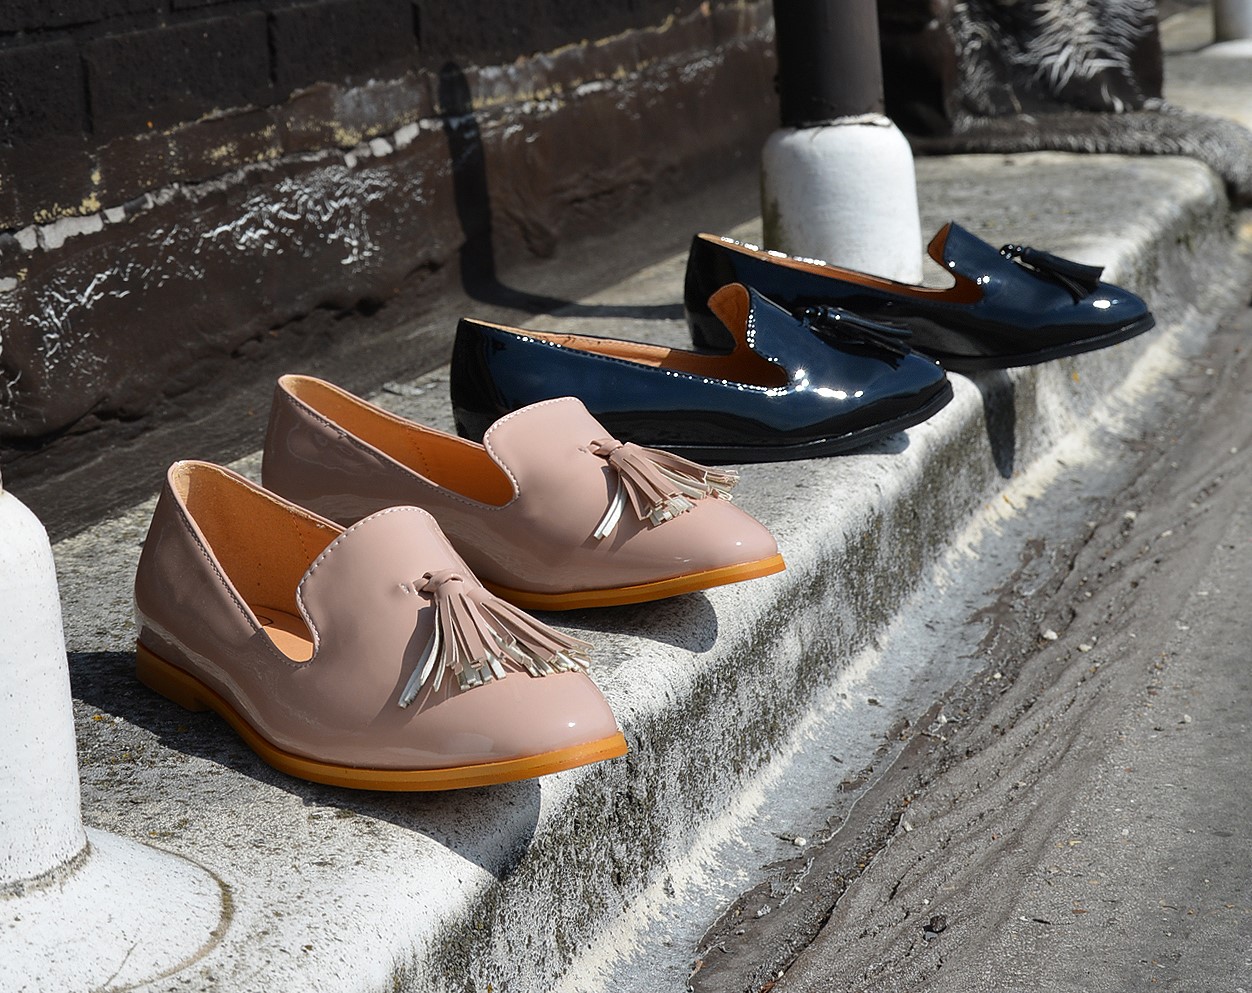 XY London Betsy Tassel Loafers in Nude & Black Patent